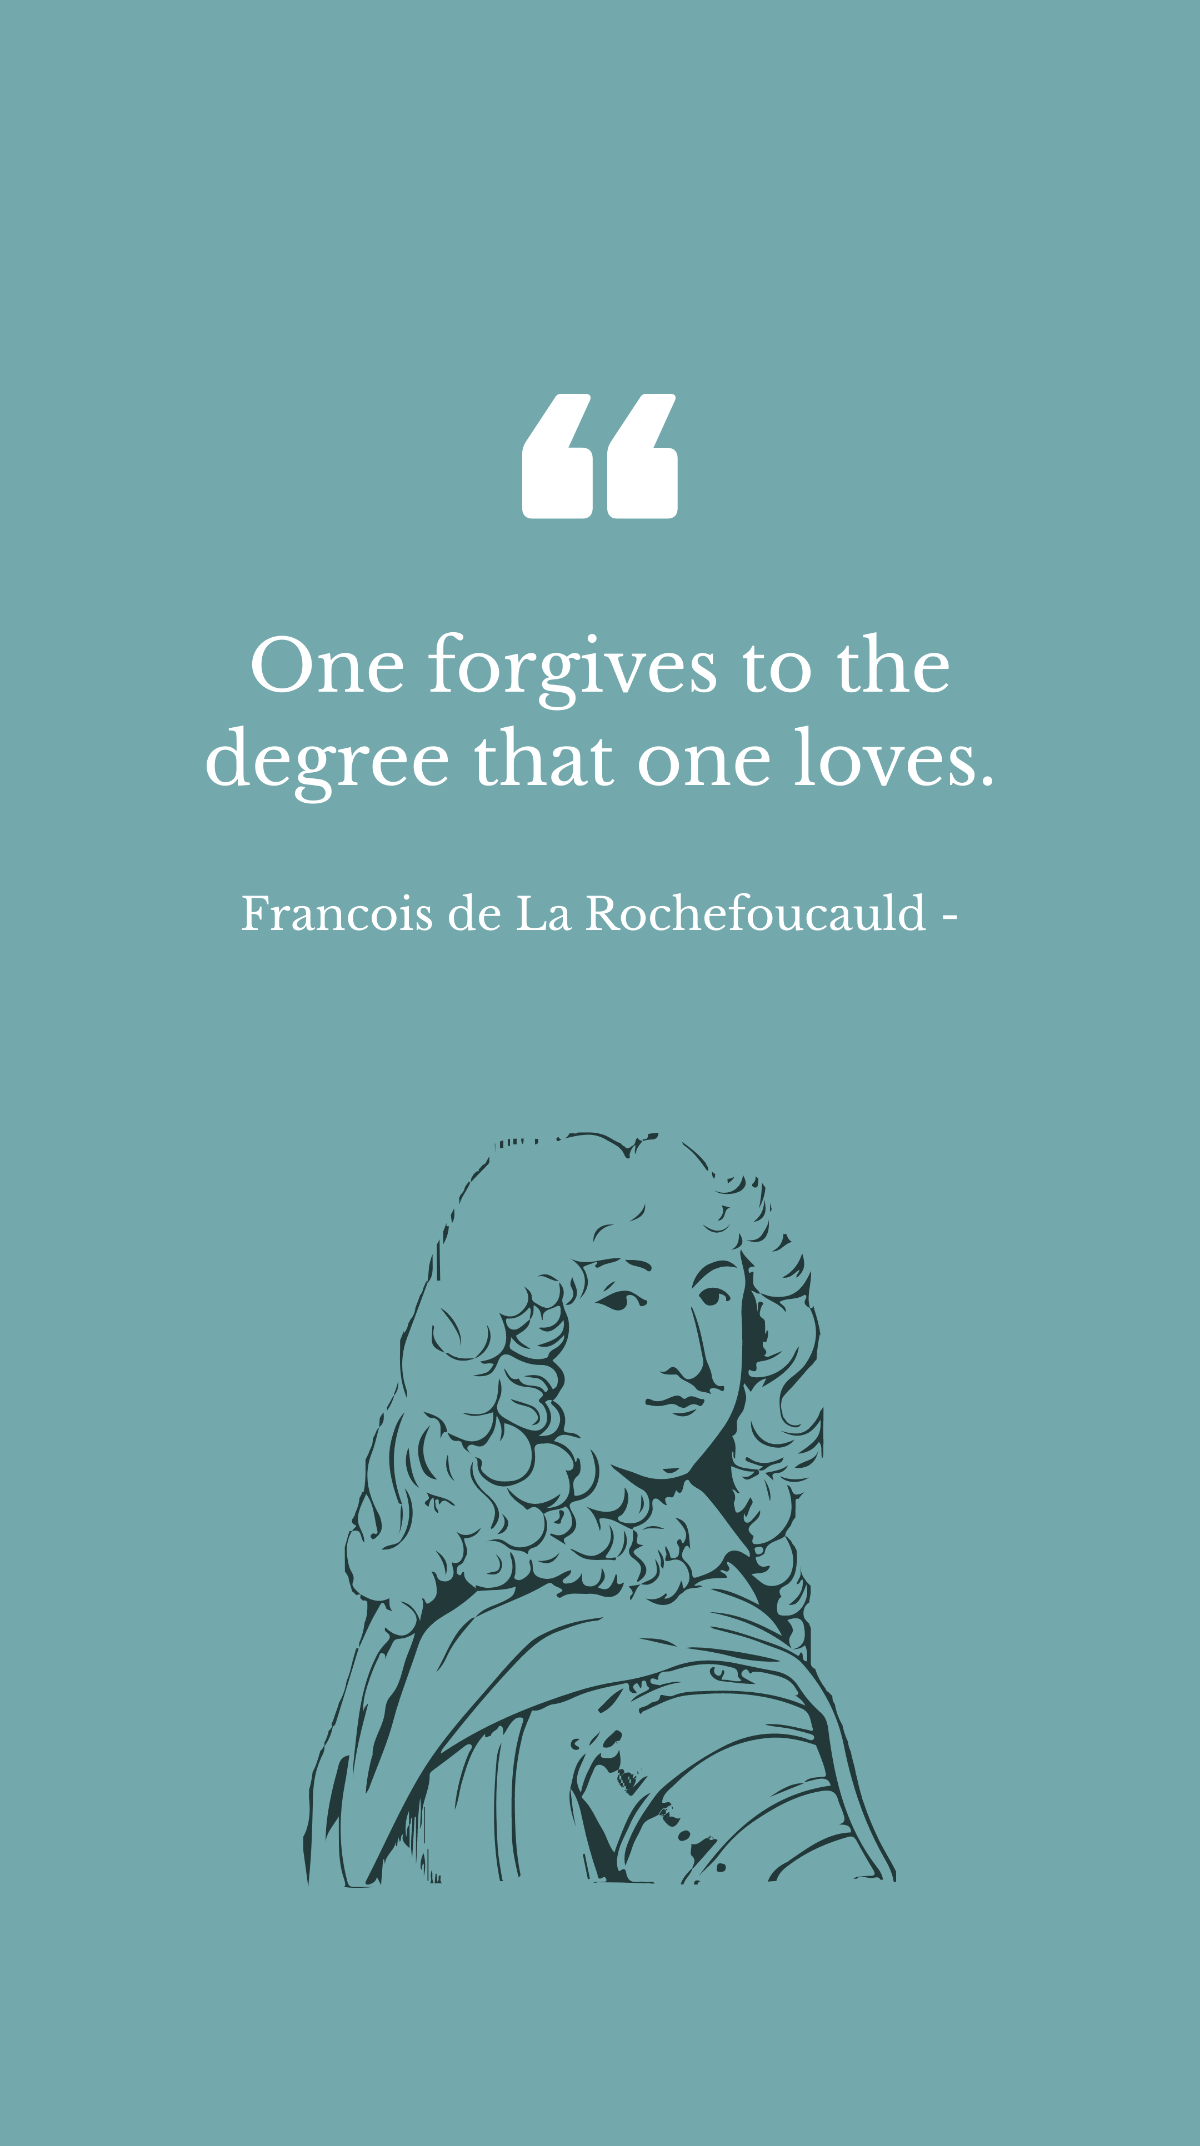 Free Francois de La Rochefoucauld - One forgives to the degree that one loves. Template